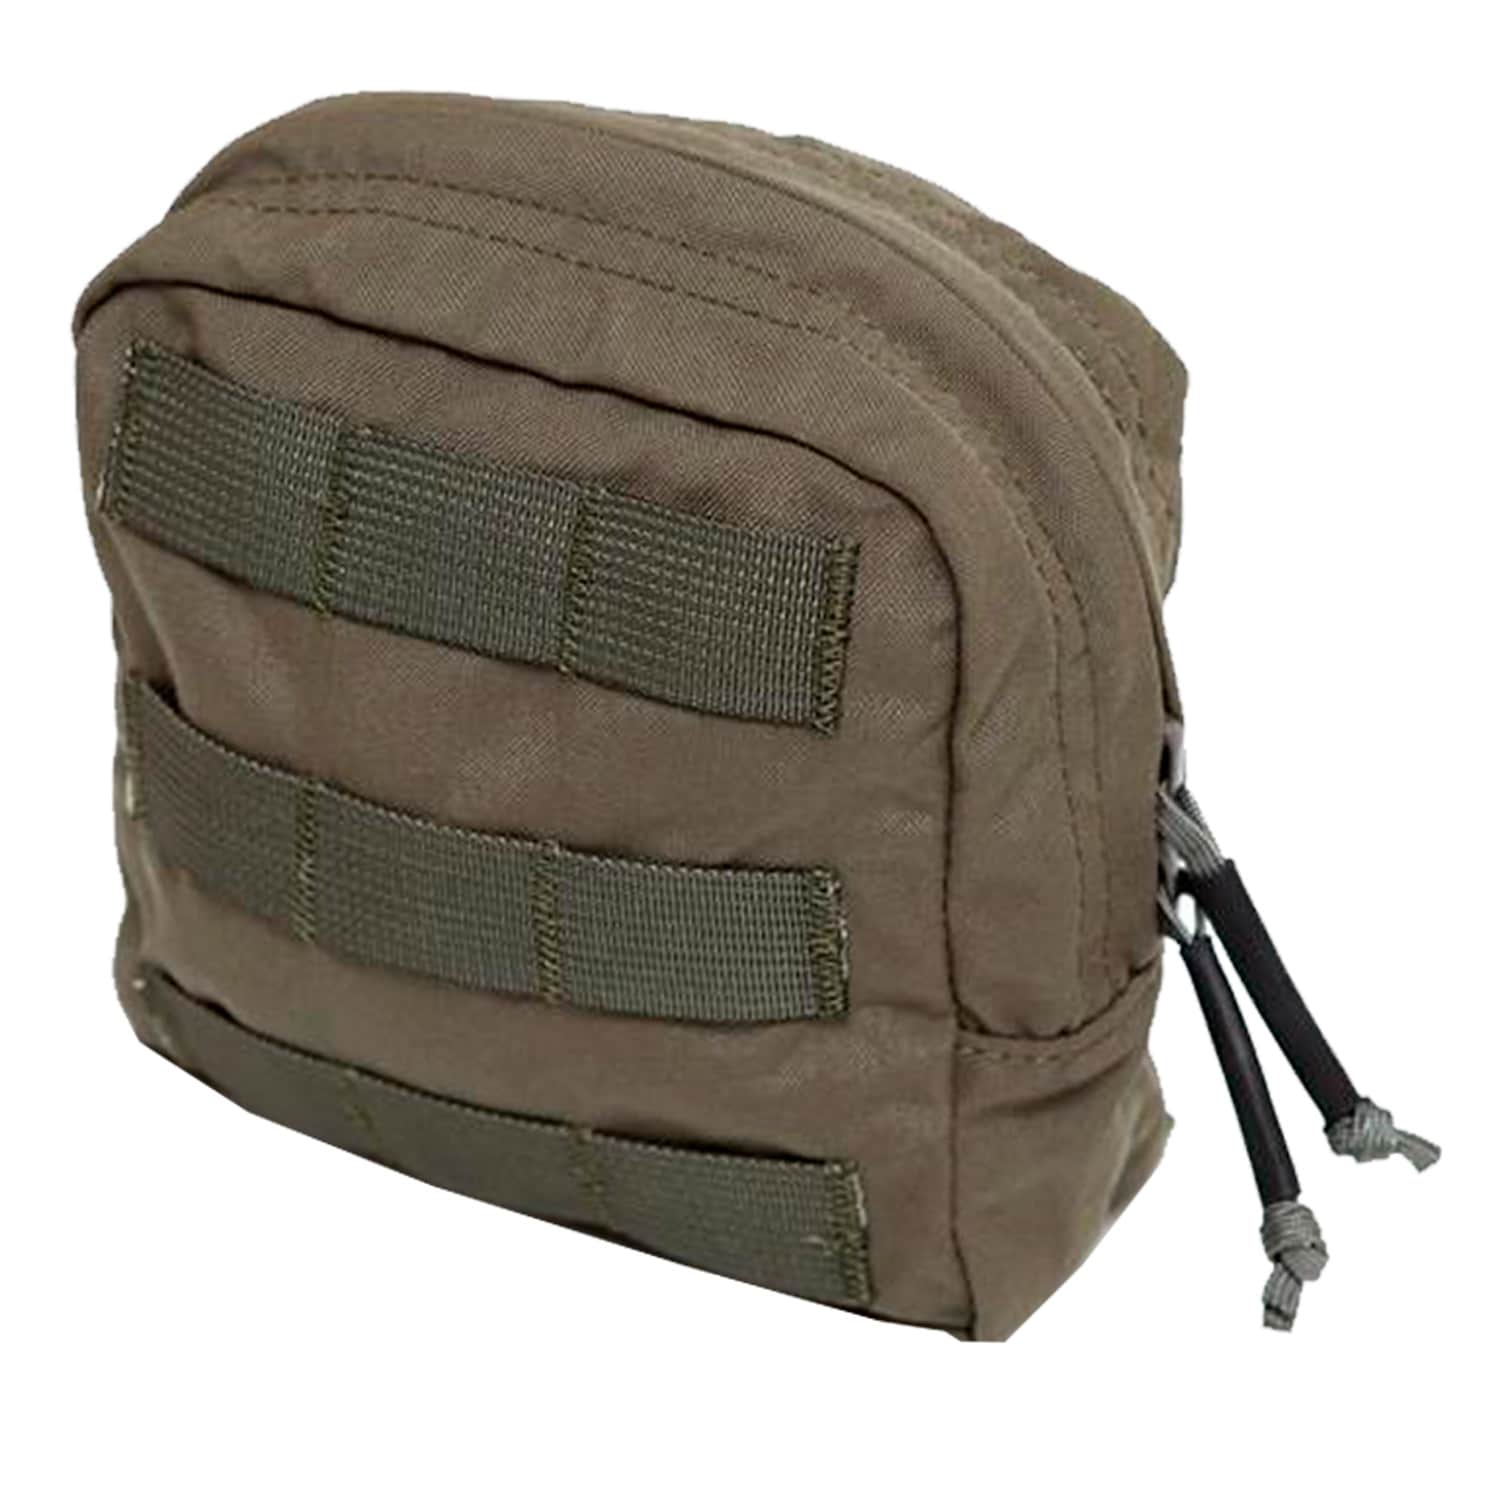 Purchase the LBX Multi-Purpose Utility Pouch ranger green by ASM